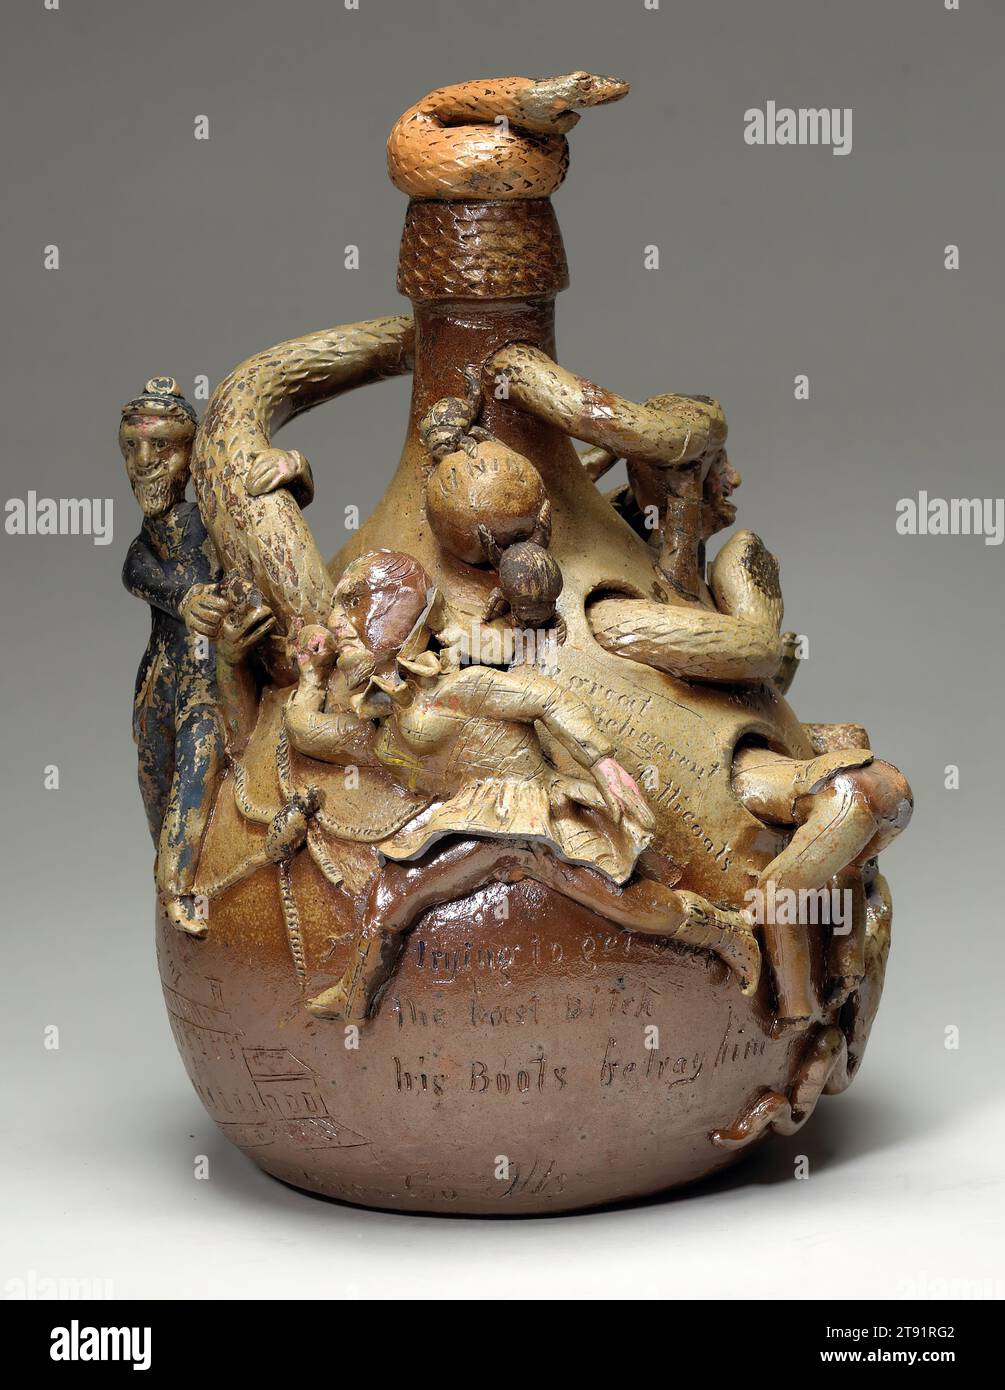 Snake jug, c. 1865, Anna Pottery, Anna, Illinois, 1859–1894, 12 1/2 x 8 5/16 x 8 11/16 in. (31.75 x 21.11 x 22.07 cm), Stoneware with painted decoration, 19th century, Cornwall and Wallace Kirkpatrick, brothers who owned the Anna Pottery in Anna, Illinois, made a name for themselves with their bizarre wares, especially jugs with realistic writhing snakes. Here, a scene from the Civil War (1861–65) shows Union soldiers attempting to catch Jefferson Davis, president of the Confederacy, who flees them disguised as a woman. The dark spots on the snakes’ heads identify them as copperheads Stock Photo